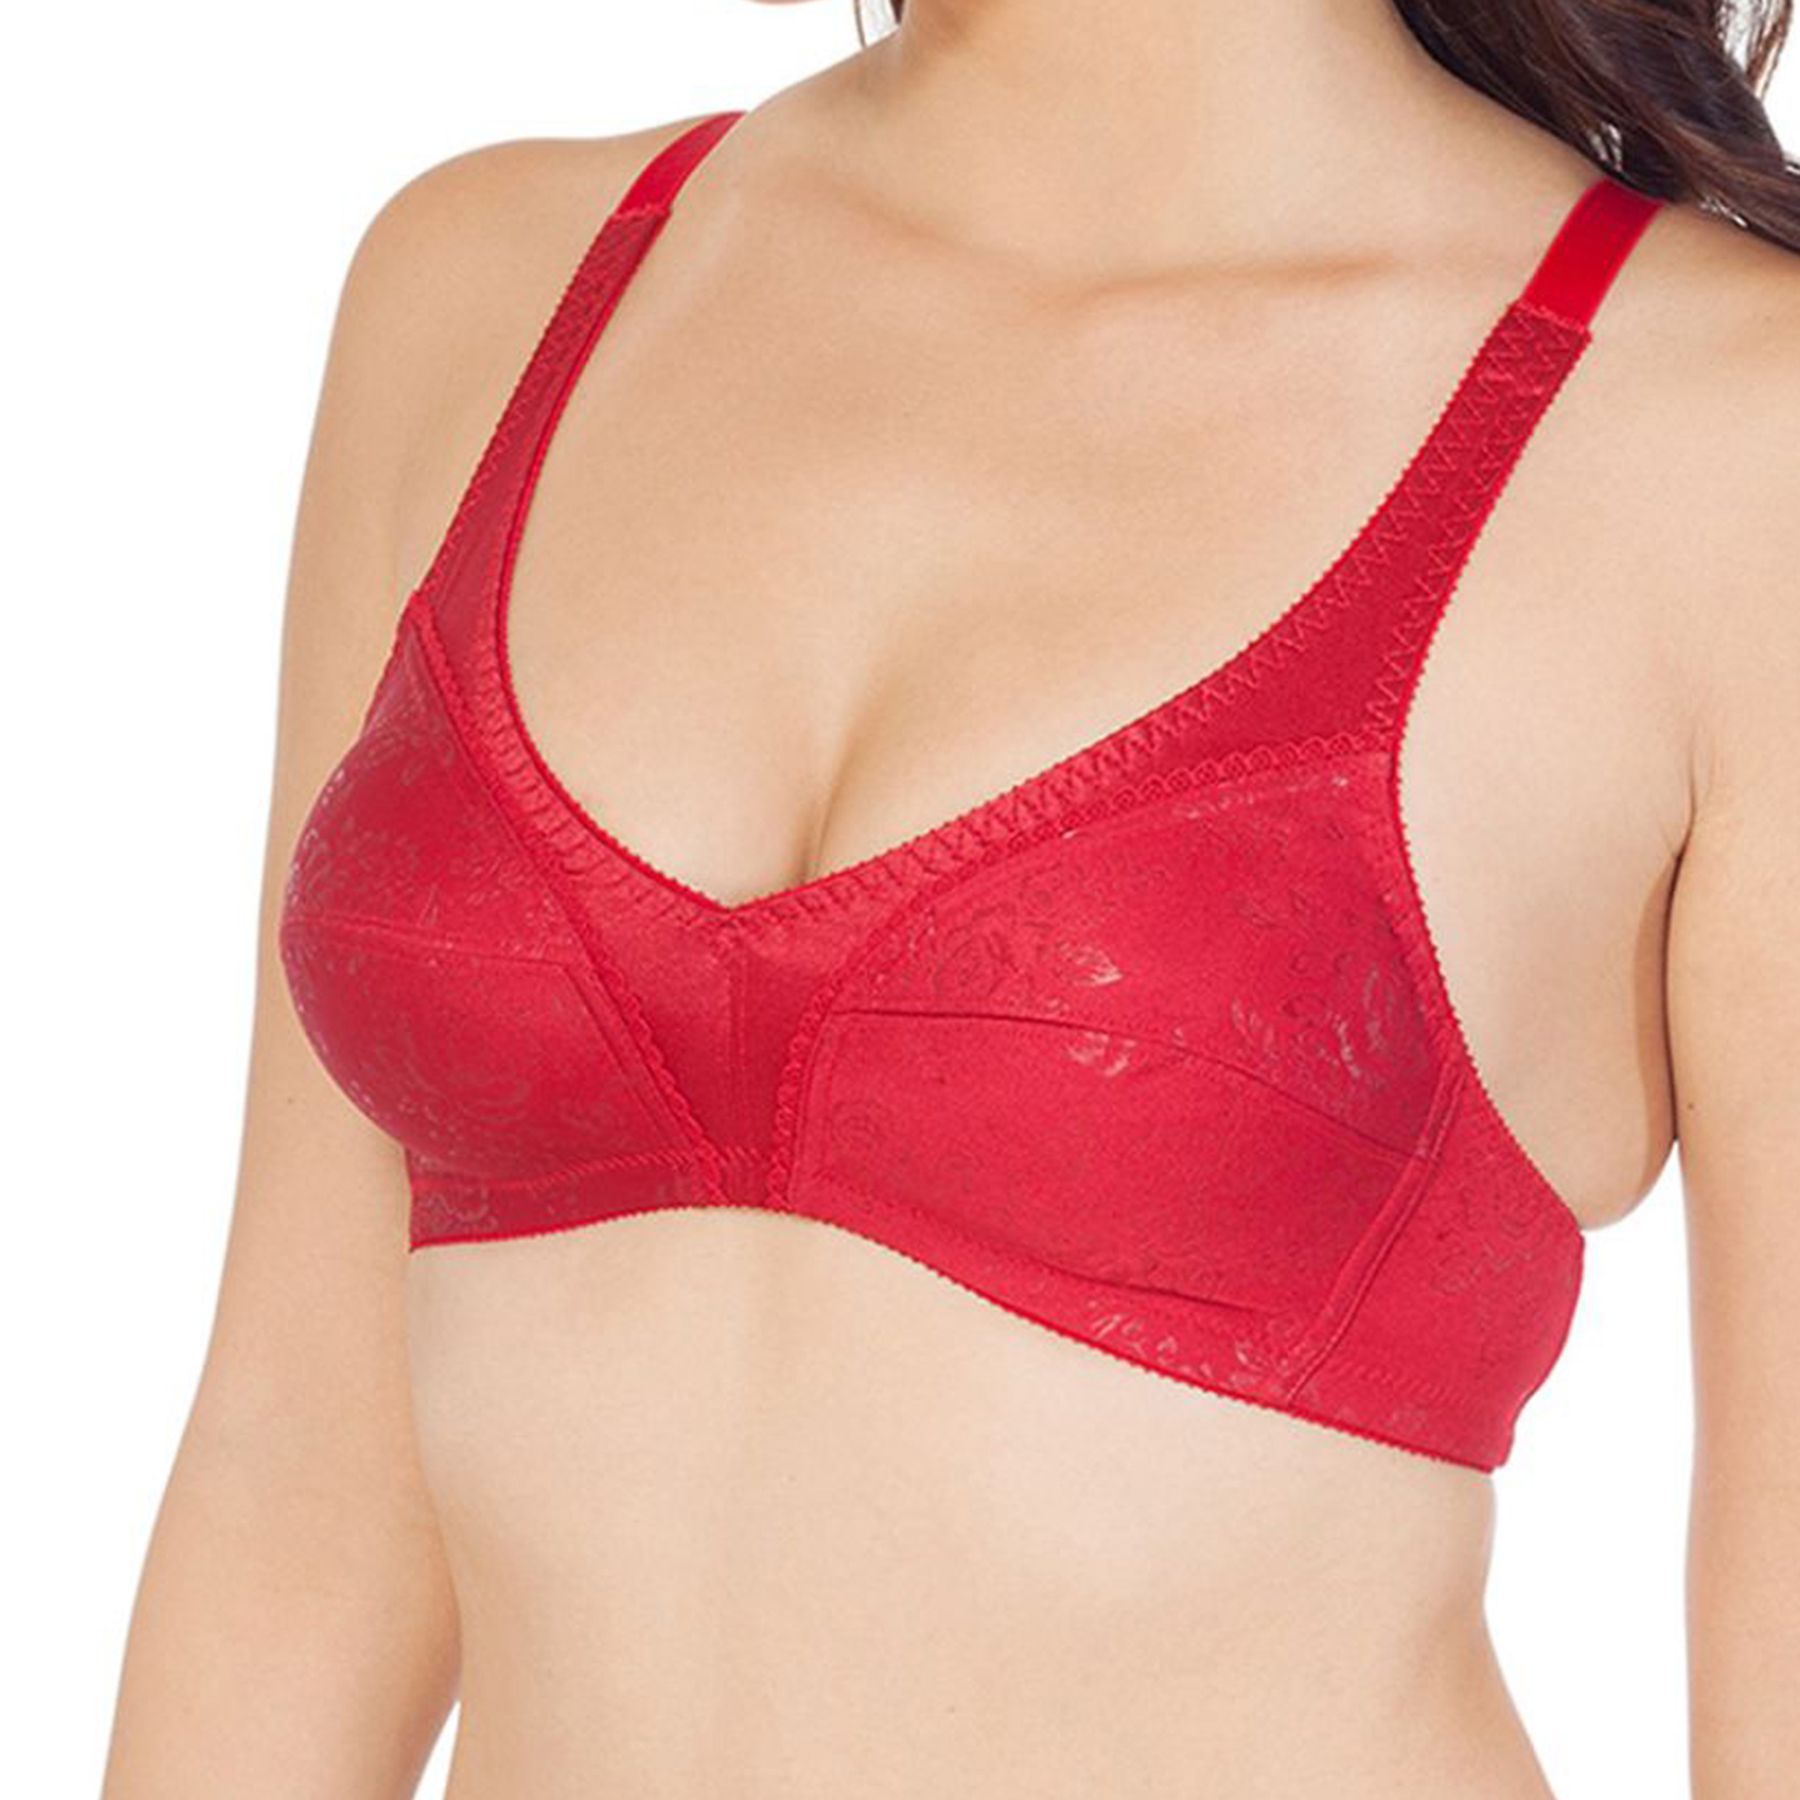 Full Coverage M frame Non Padded Non Wired Seamed Bra (PACK OF 2)-COMBO CB-310